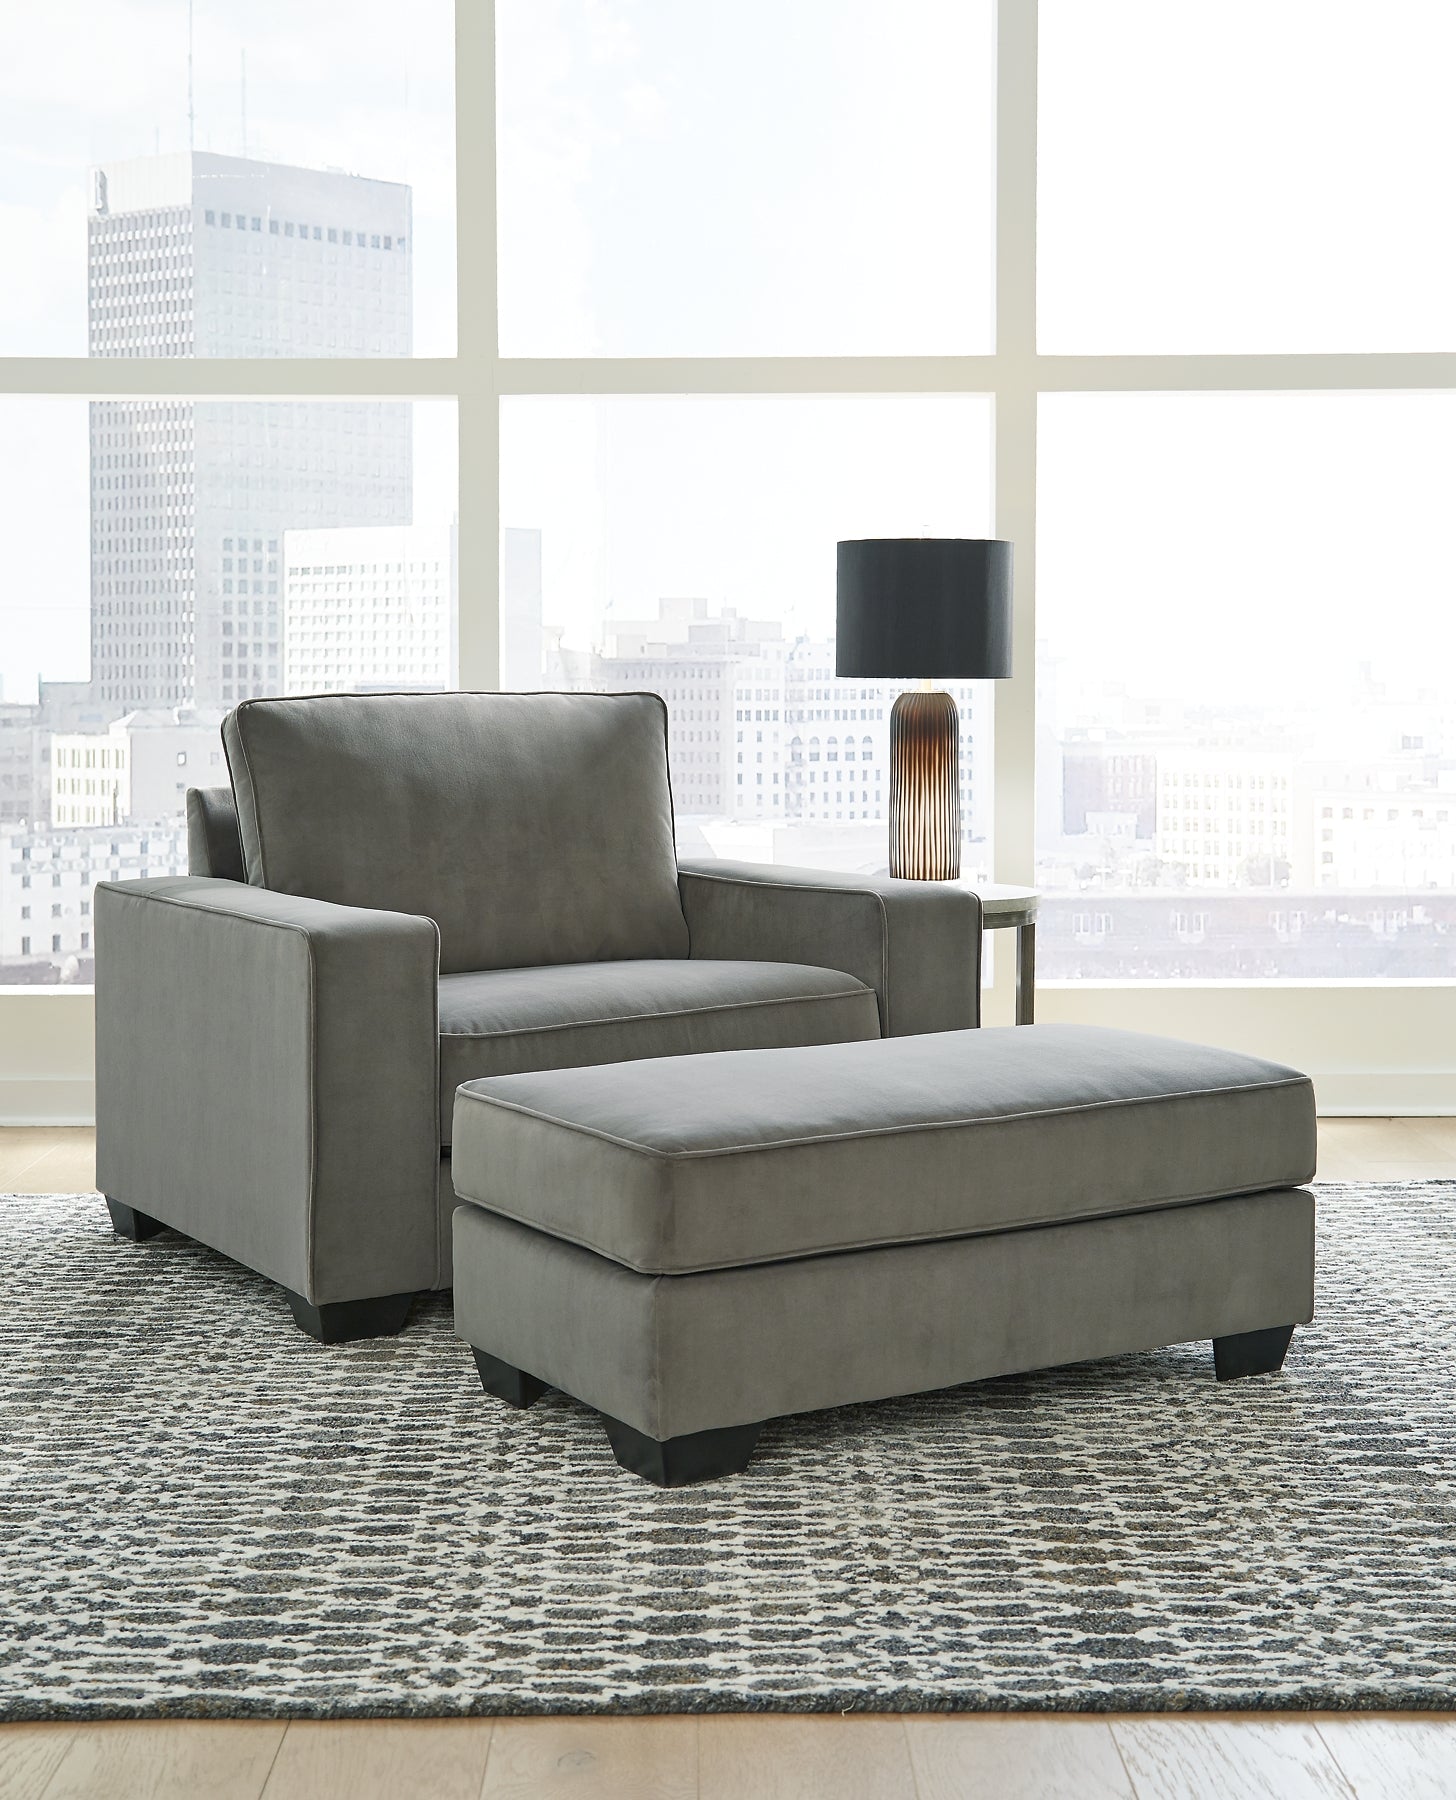 Angleton Chair and Ottoman at Walker Mattress and Furniture